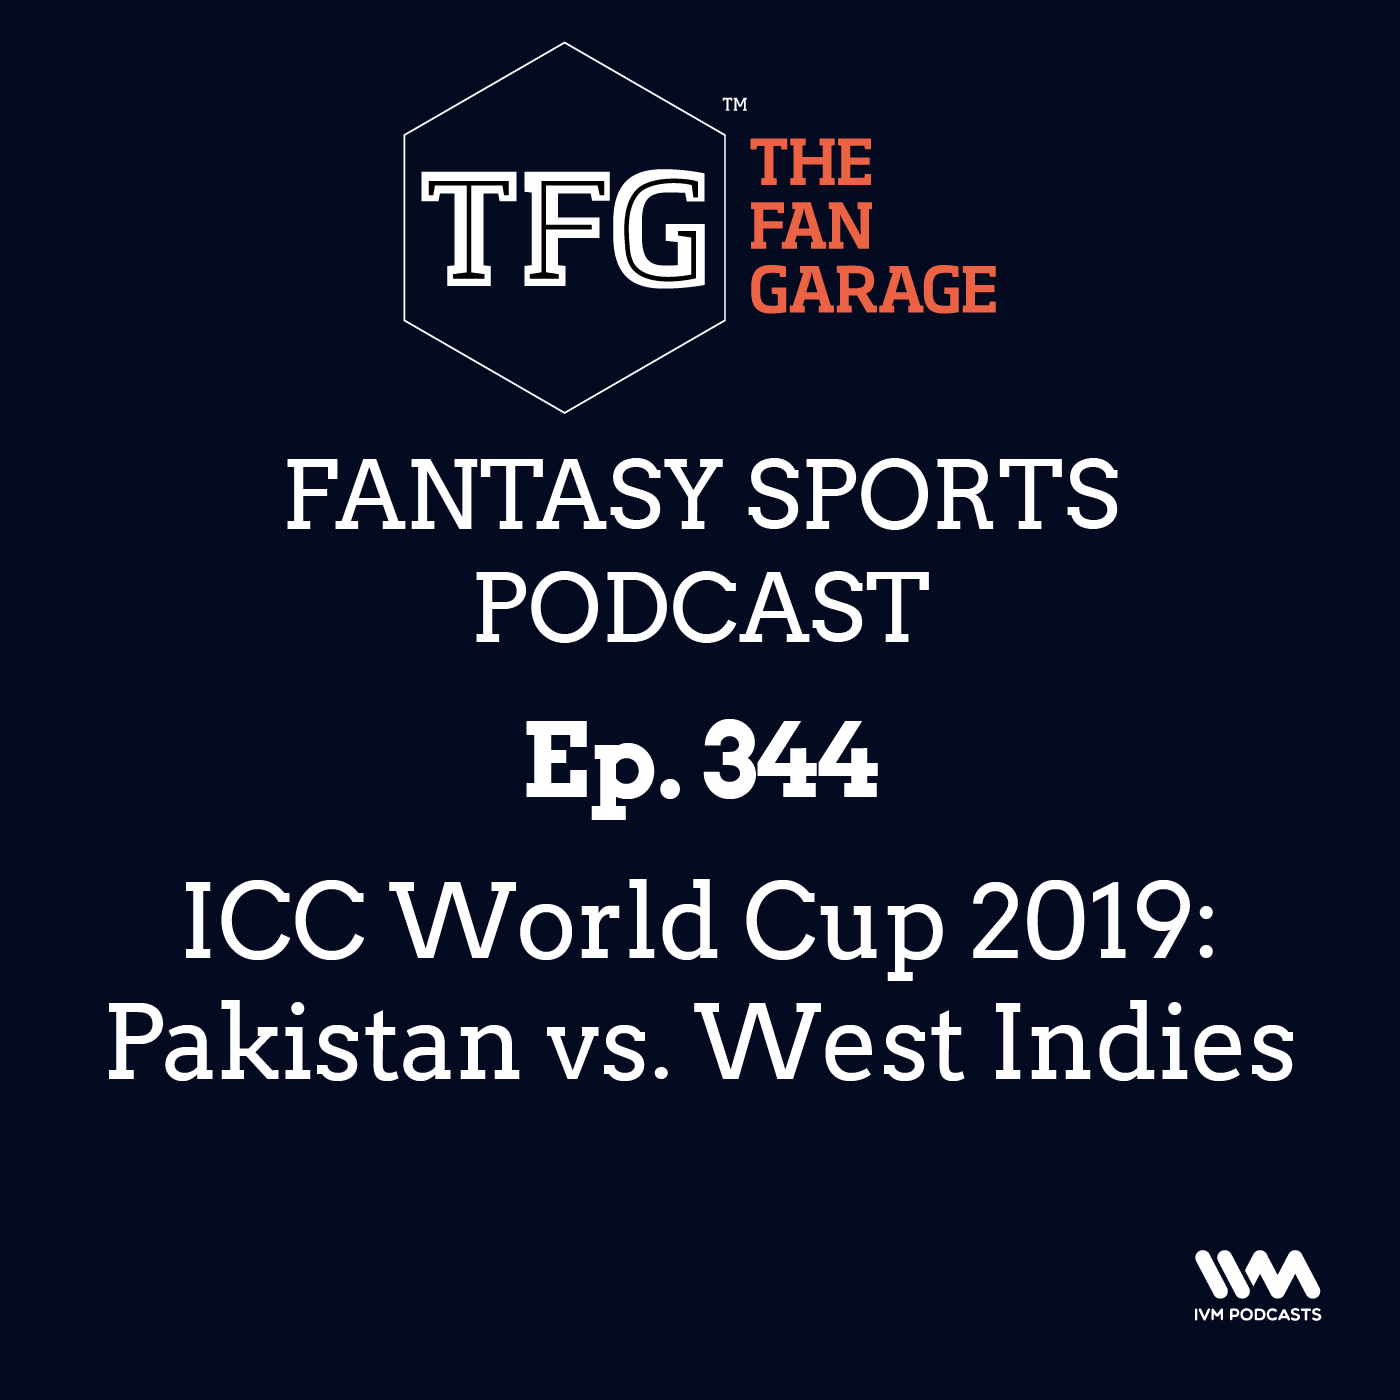 TFG Fantasy Sports Podcast Ep. 344: ICC World Cup 2019: Pakistan vs. West Indies